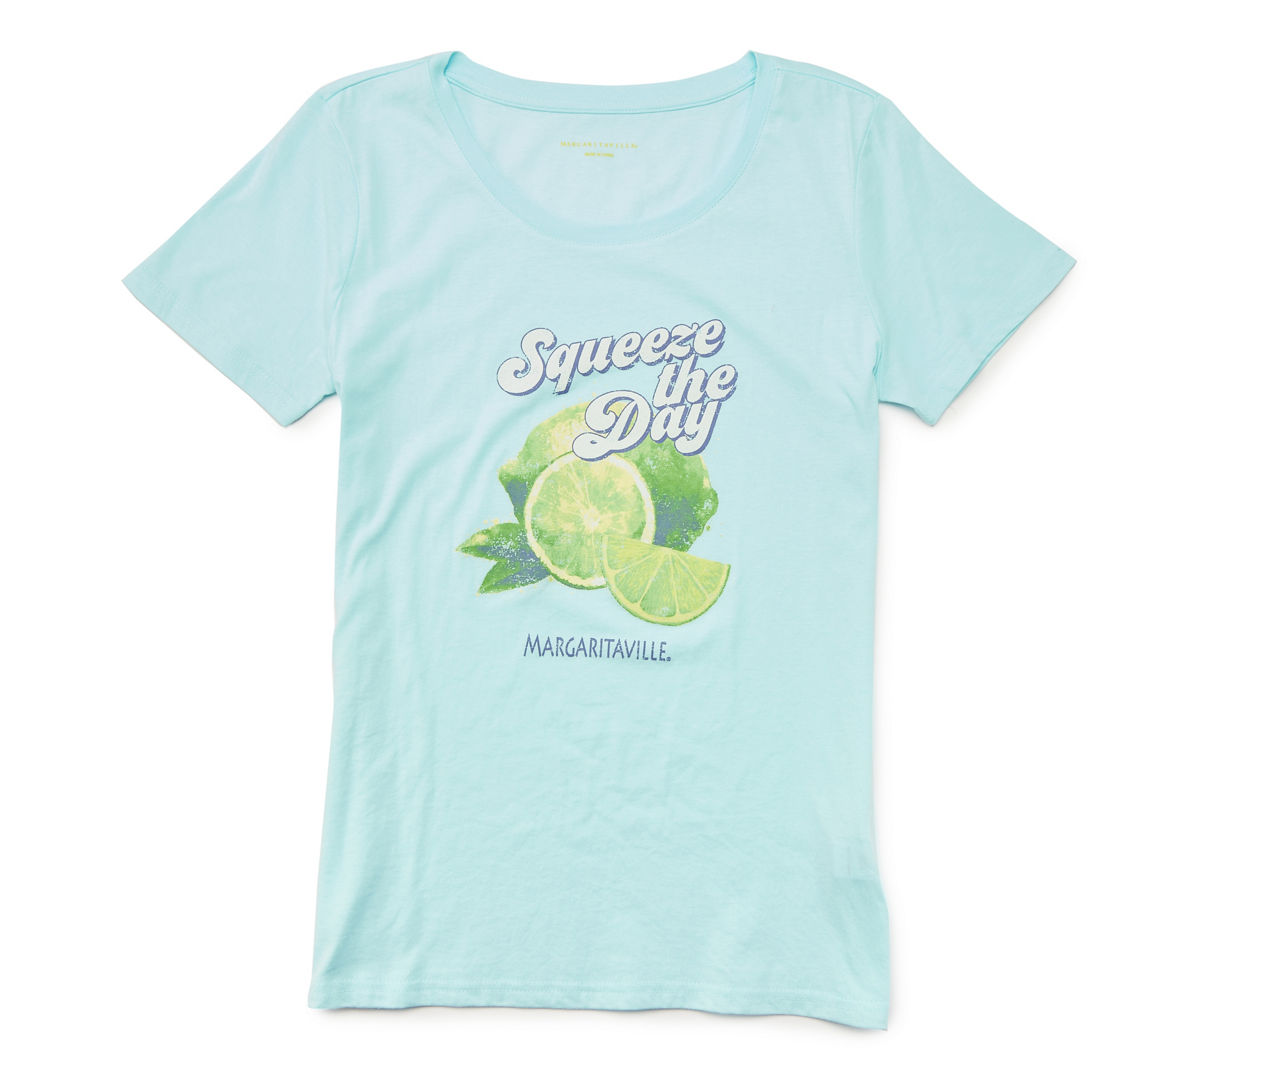 Women's Size X-Large "Squeeze My Day" Aqua Lime Tee